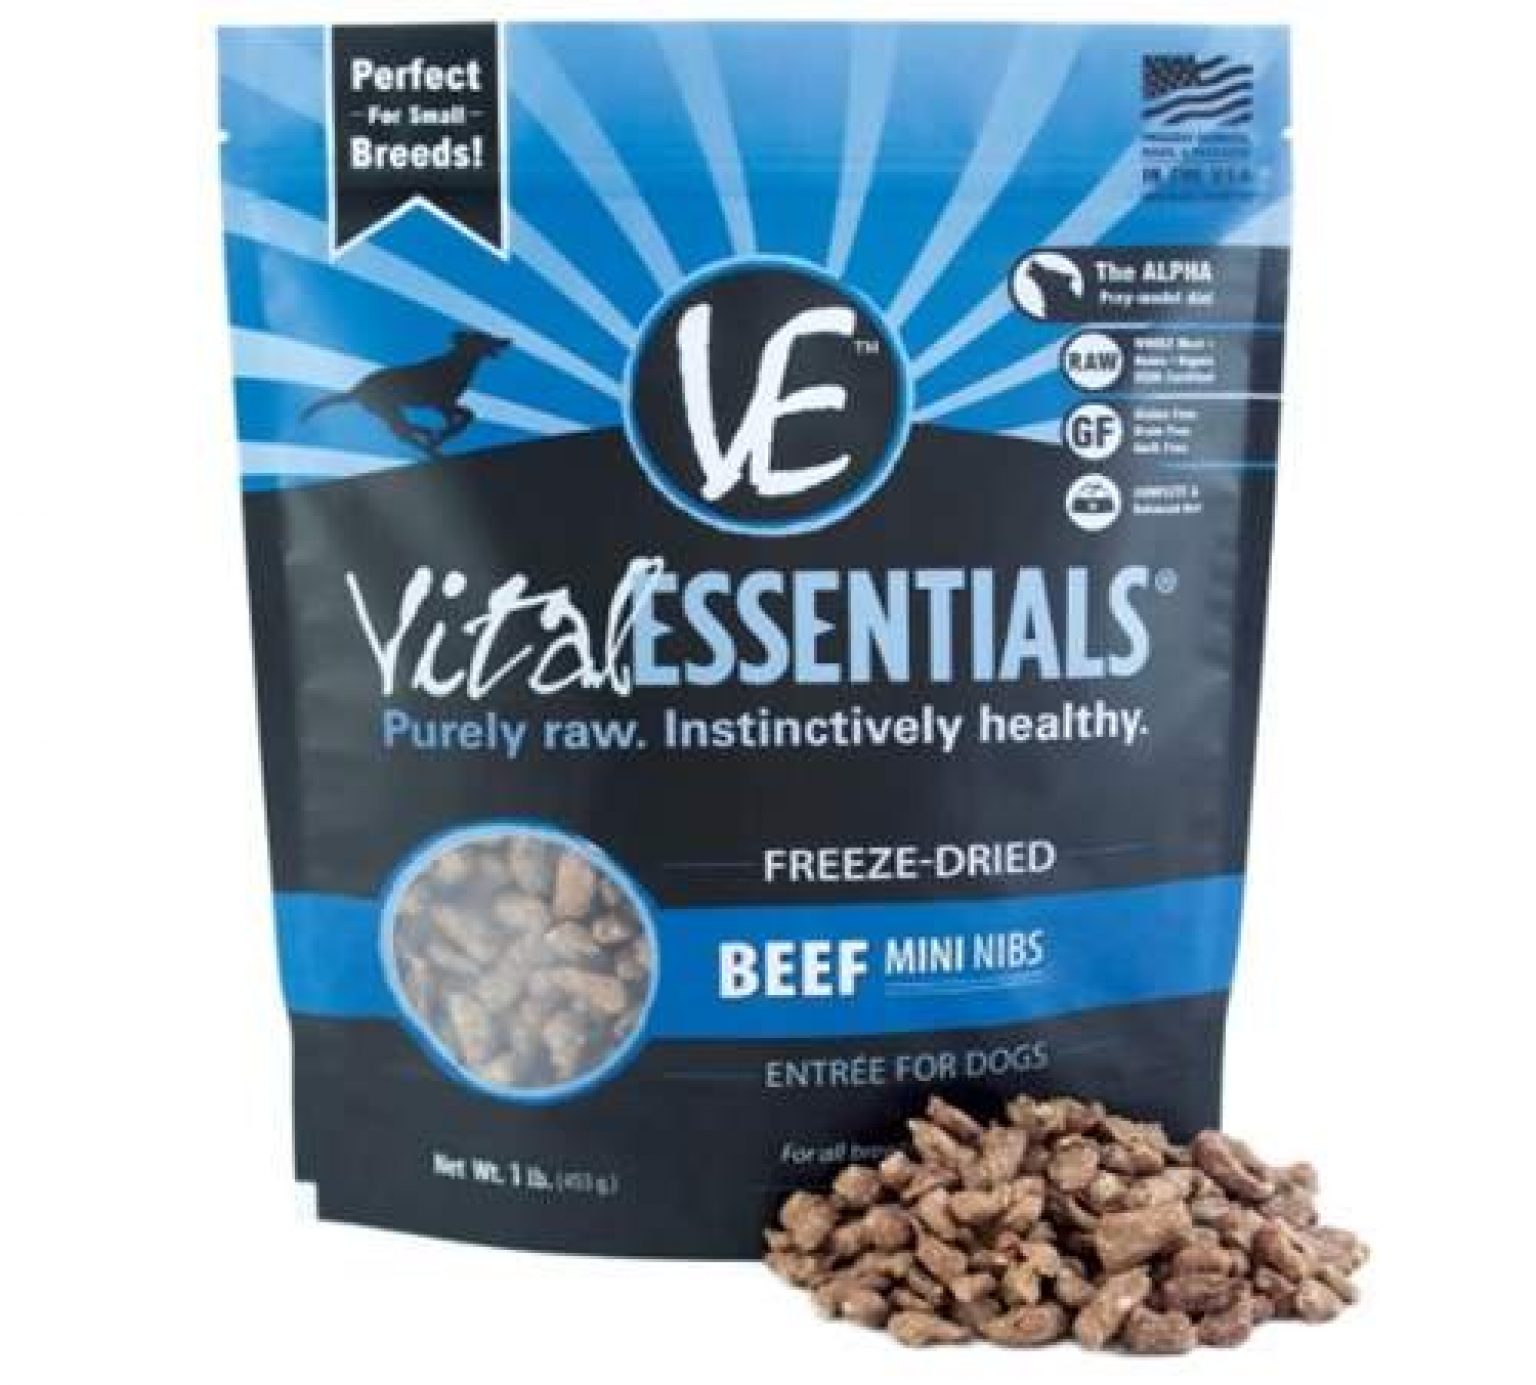 14 Best Freeze-Dried Dog Food Brands with Reviews | Pet Care Advisors